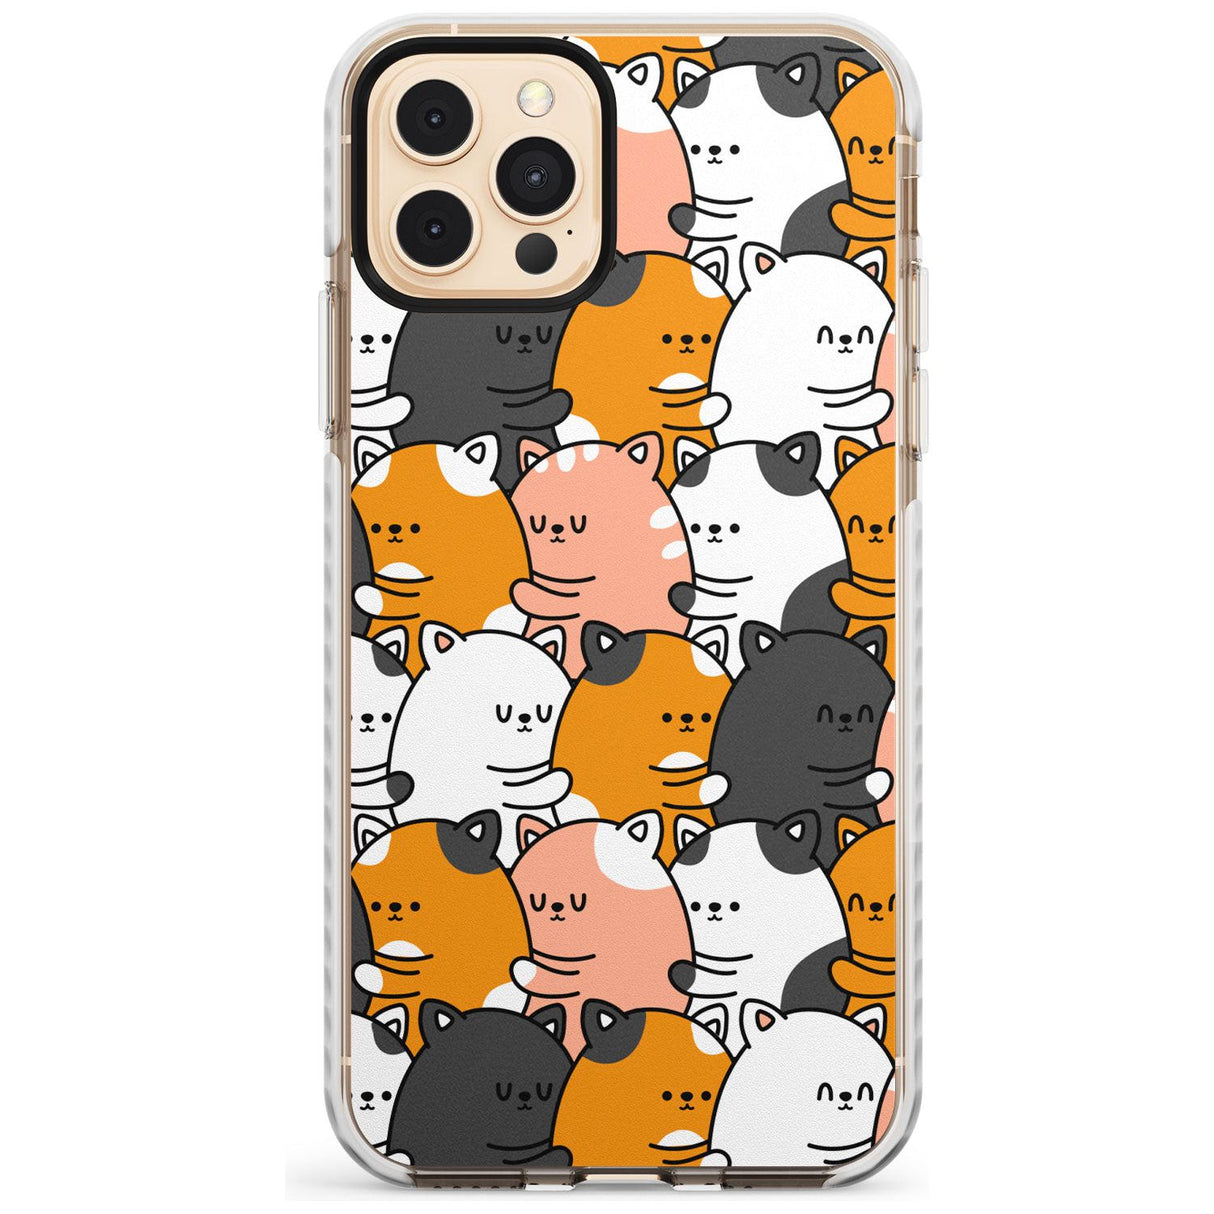 Spooning Cats Kawaii Pattern Impact Phone Case for iPhone 11 Pro Max